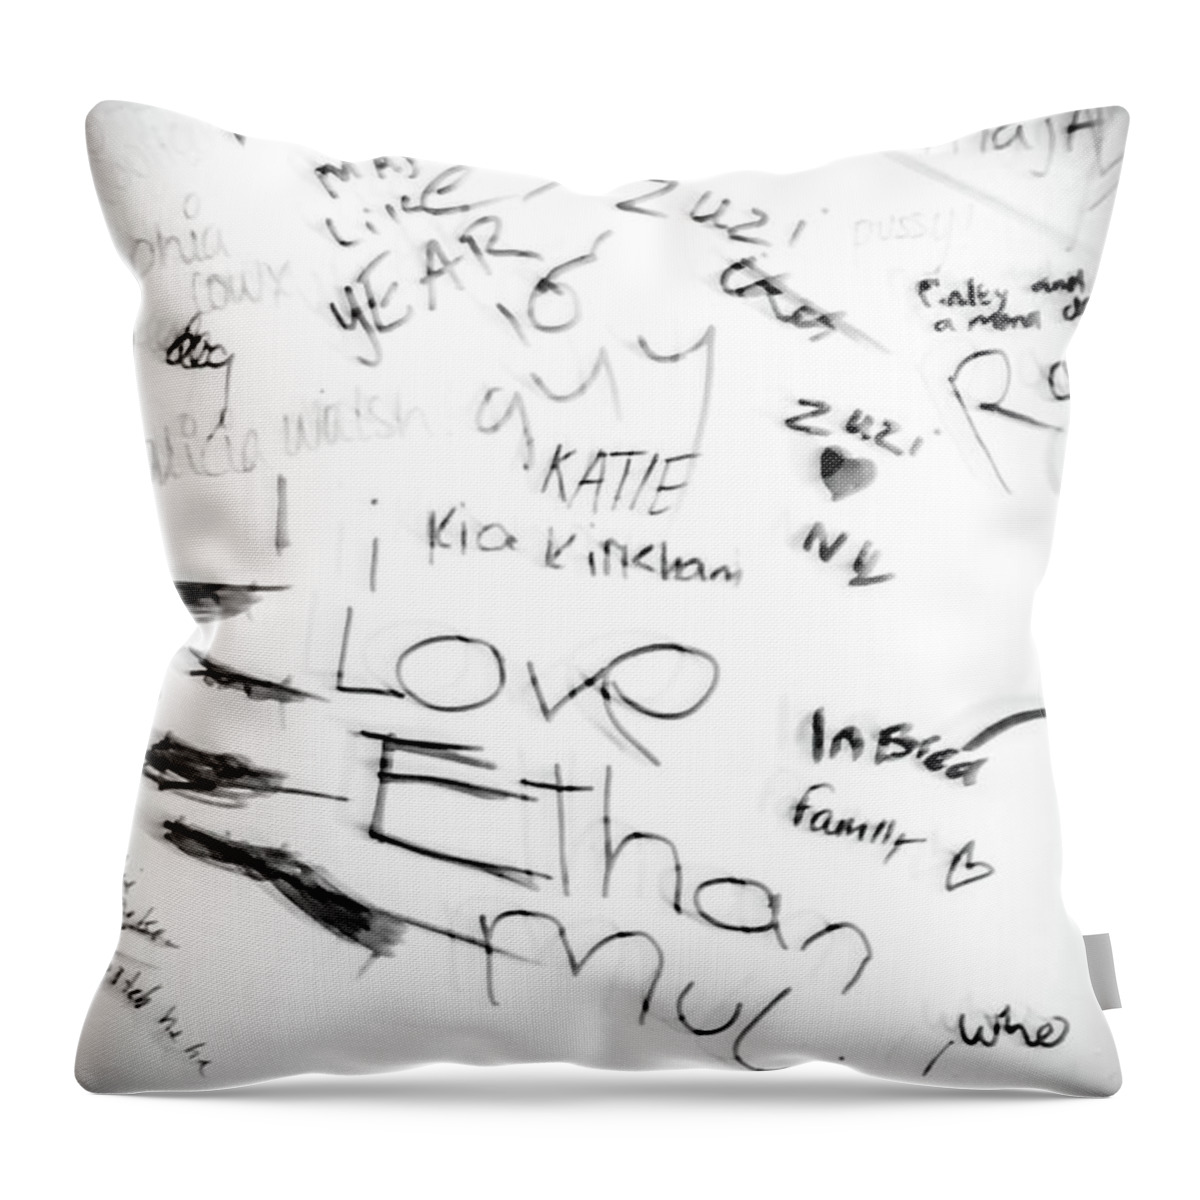 Morecambe Throw Pillow featuring the photograph Graffiti Number 1 by David Ridley